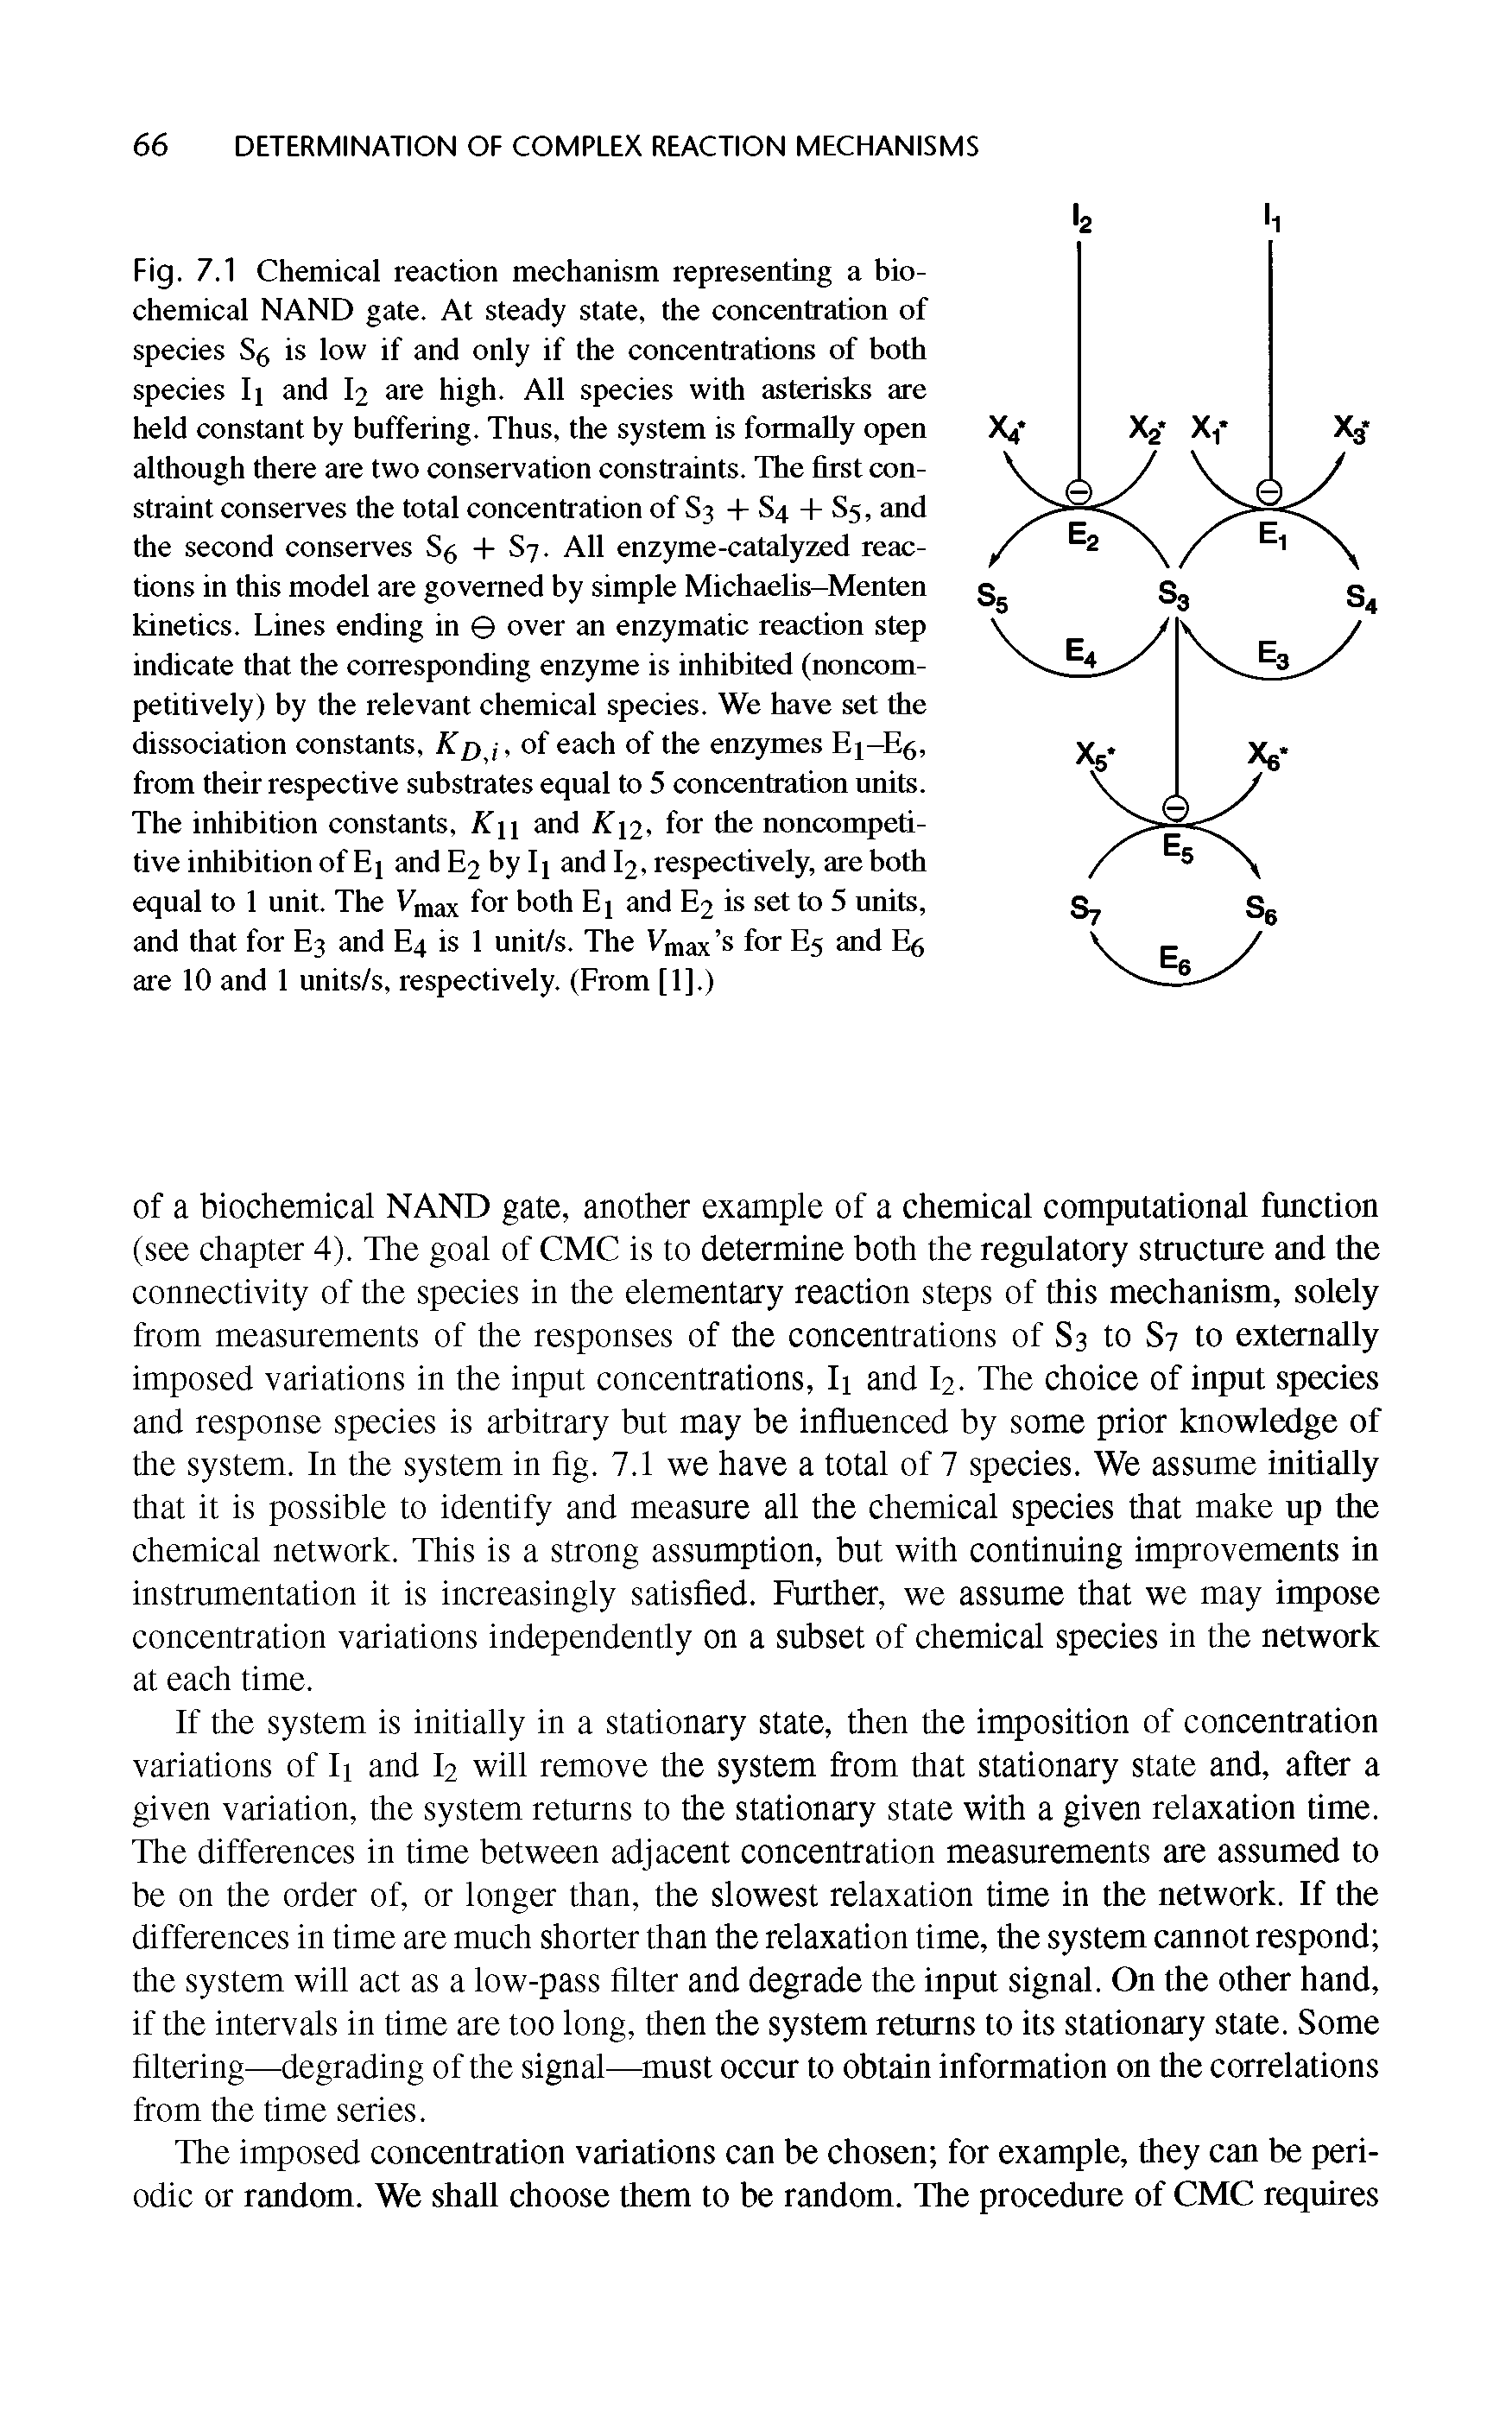 Fig. 7.1 Chemical reaction mechanism representing a biochemical NAND gate. At steady state, the concentration of species 85 is low if and only if the concentrations of both species Ii and I2 are high. All species with asterisks are held constant by buffering. Thus, the system is formally open although there are two conservation constraints. The first constraint conserves the total concentration of S3 -F 84 -F 85, and the second conserves -F 87. All enzyme-catalyzed reactions in this model are governed by simple Michaelis-Menten kinetics. Lines ending in over an enzymatic reaction step indicate that the corresponding enzyme is inhibited (noncom-petitively) by the relevant chemical species. We have set the dissociation constants, Kp j, of each of the enzymes Ei-Eg, from their respective substrates equal to 5 concentration units. The inhibition constants, K i and K 2, for the noncompetitive inhibition of E1 and 7 by 11 and I2, respectively, are both equal to 1 unit. The Vmax for both Ej and E2 is set to 5 units, and that for E3 and E4 is 1 unit/s. The Vmax s for E5 and Eg are 10 and 1 units/s, respectively. (From [1].)...